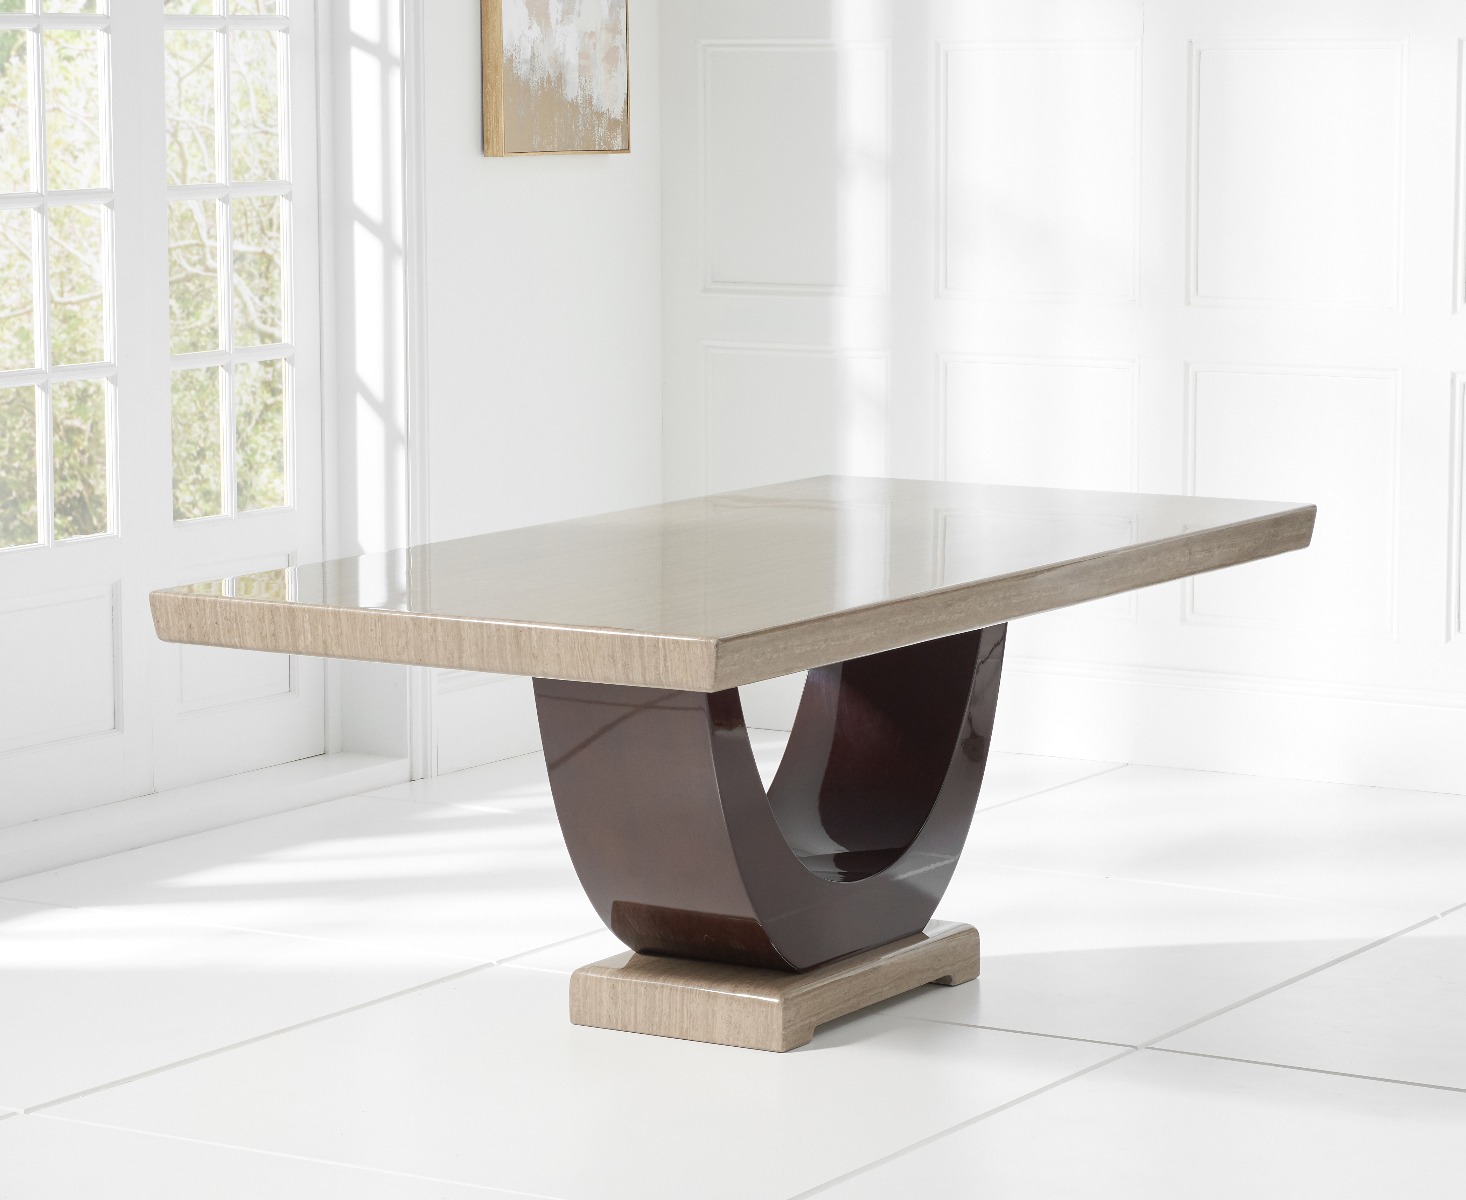 Photo 5 of Novara 170cm brown pedestal marble dining table with 4 grey sophia chairs